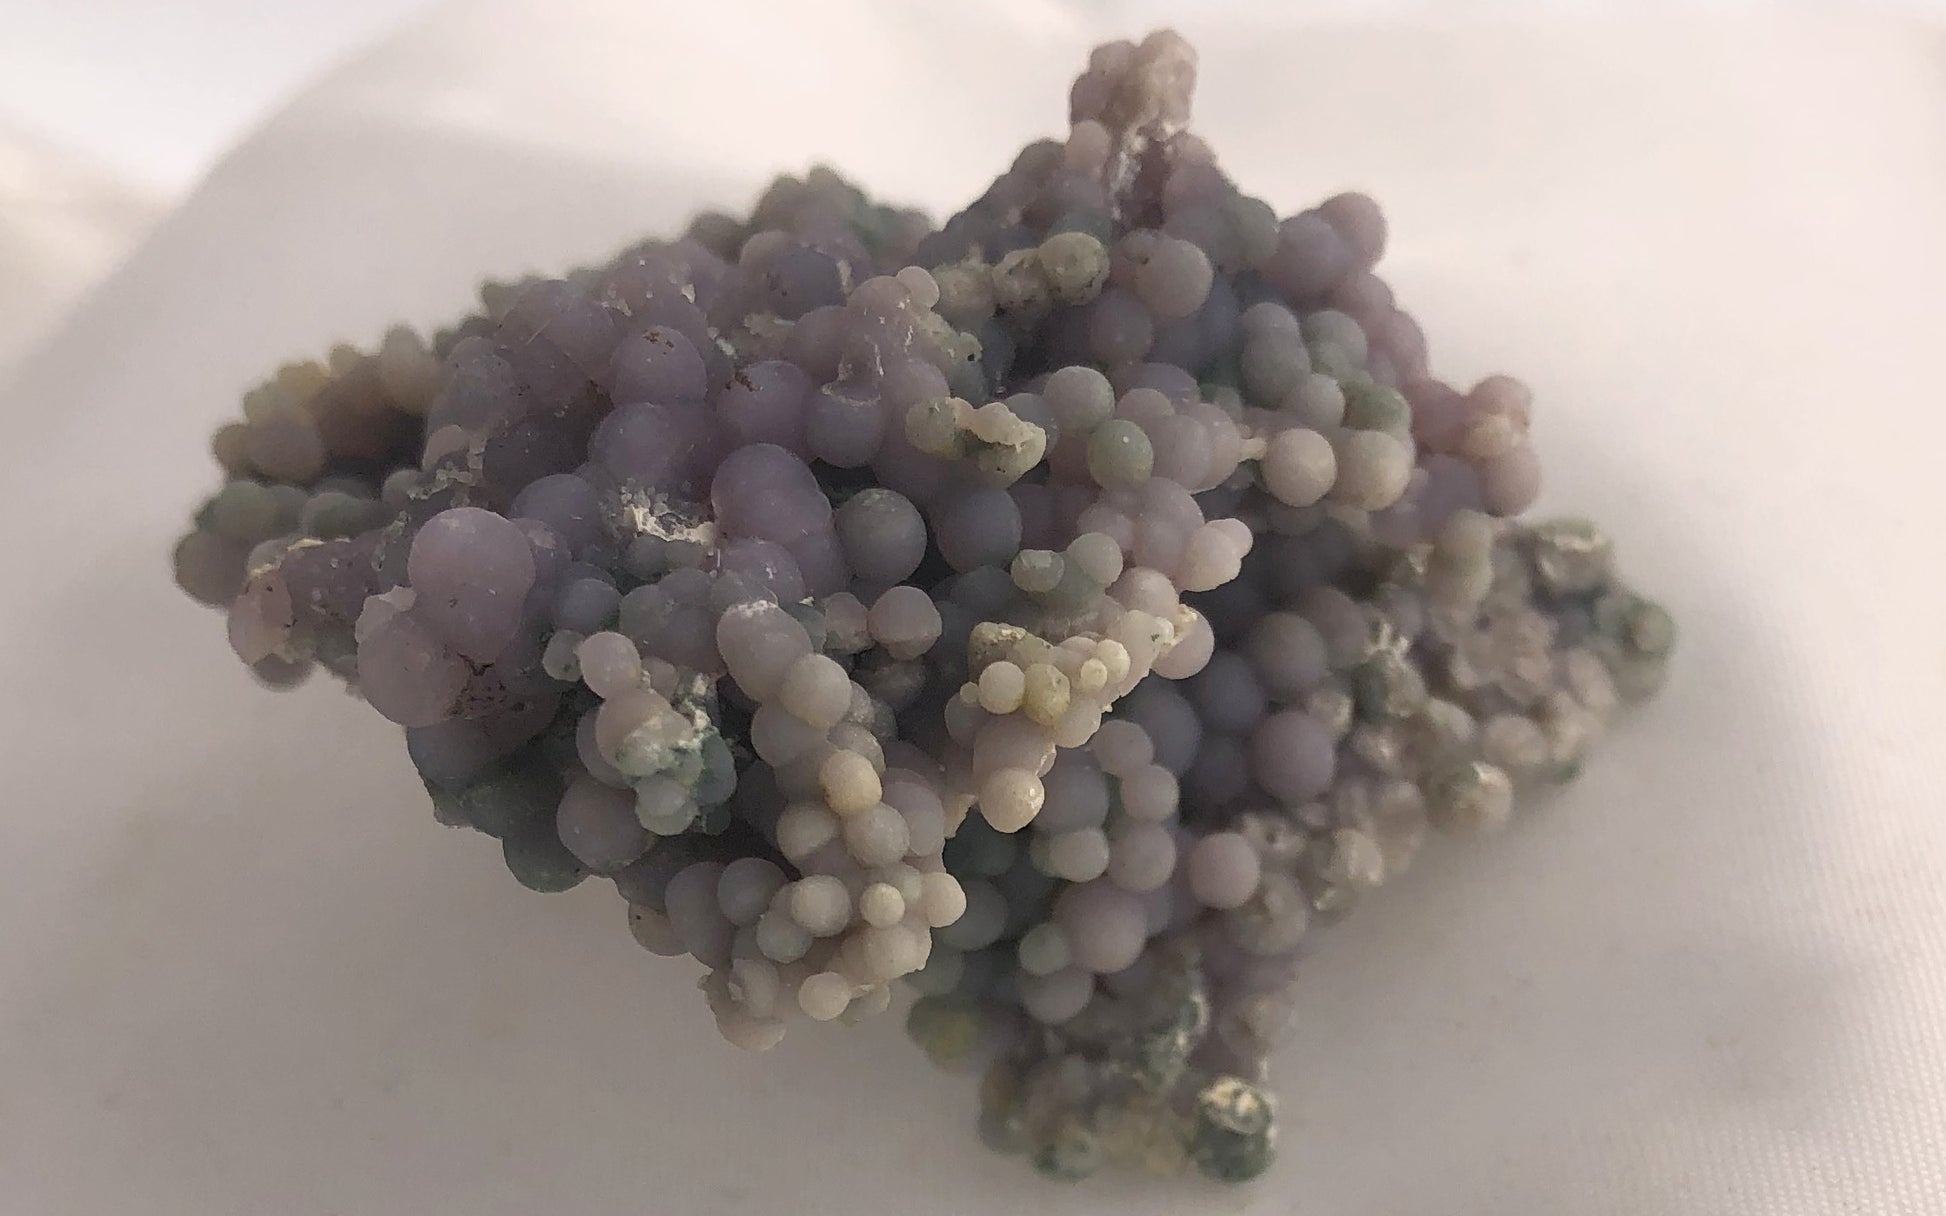 Botryoidal Chalcedony, aka Grape Agate 15 - Sulawesi, Indonesia | Of Coins & Crystals